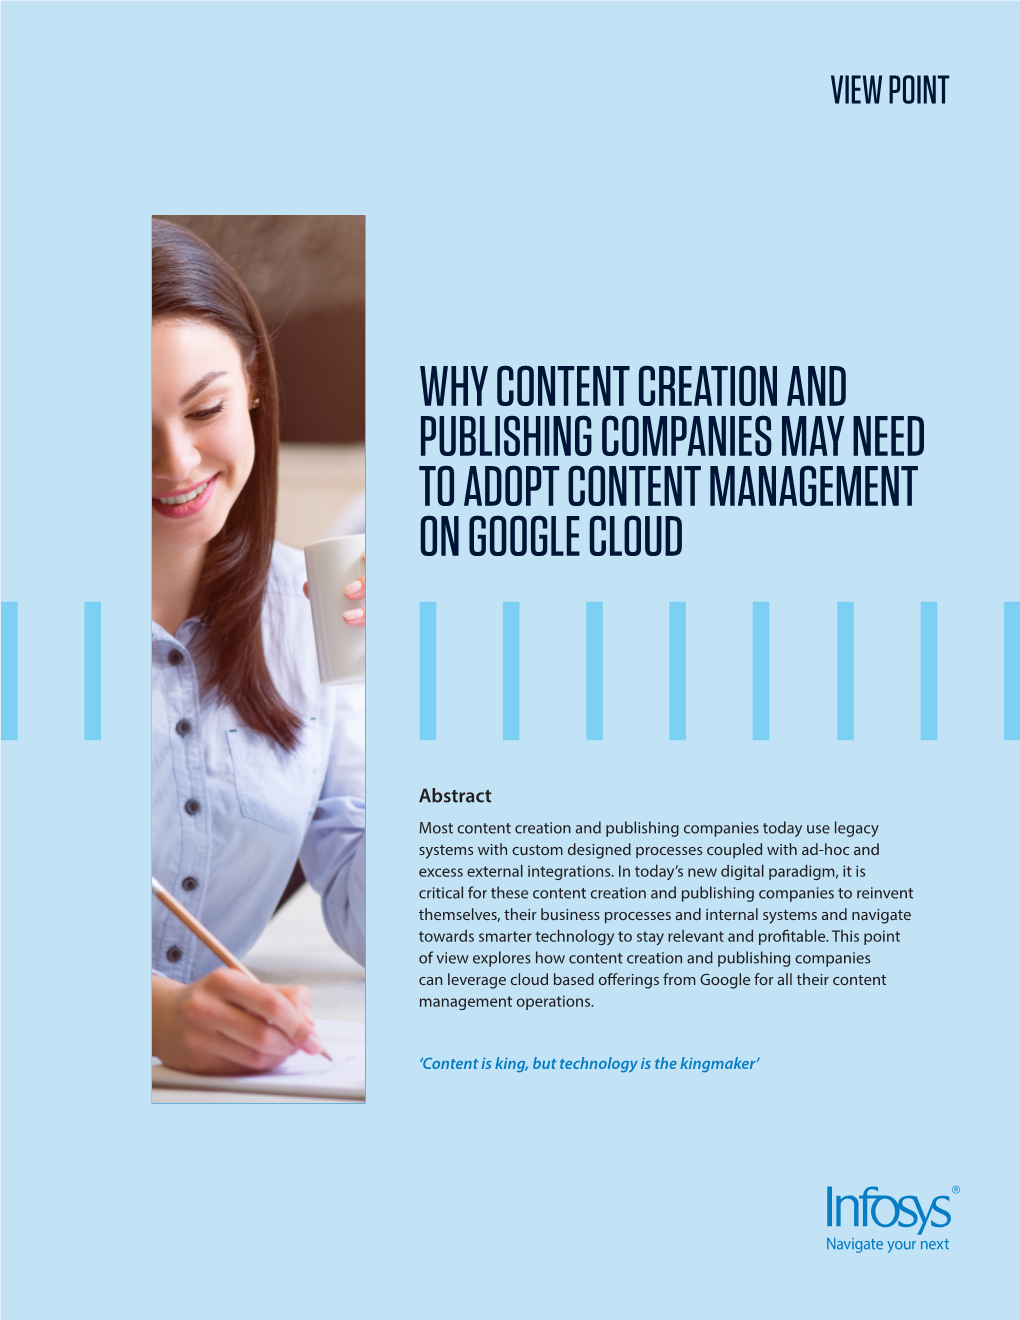 Why Content Creation and Publishing Companies May Need to Adopt Content Management on Google Cloud